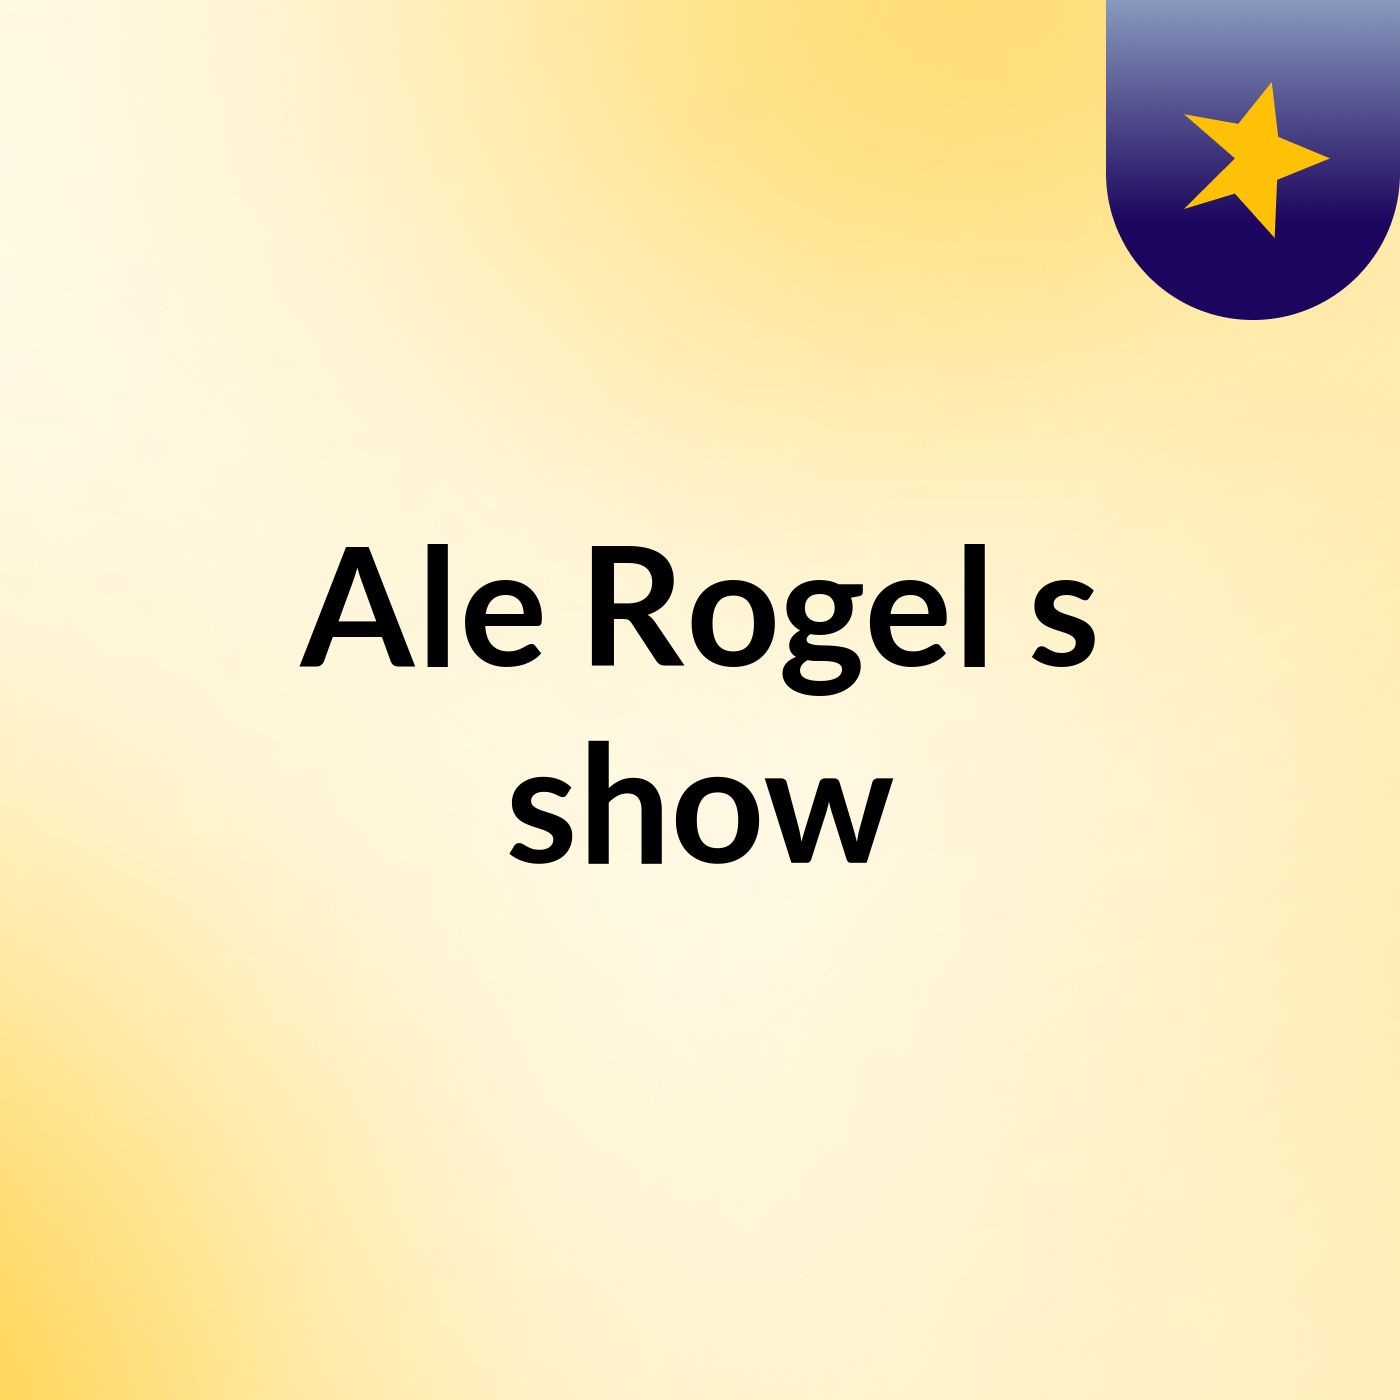 Ale Rogel's show